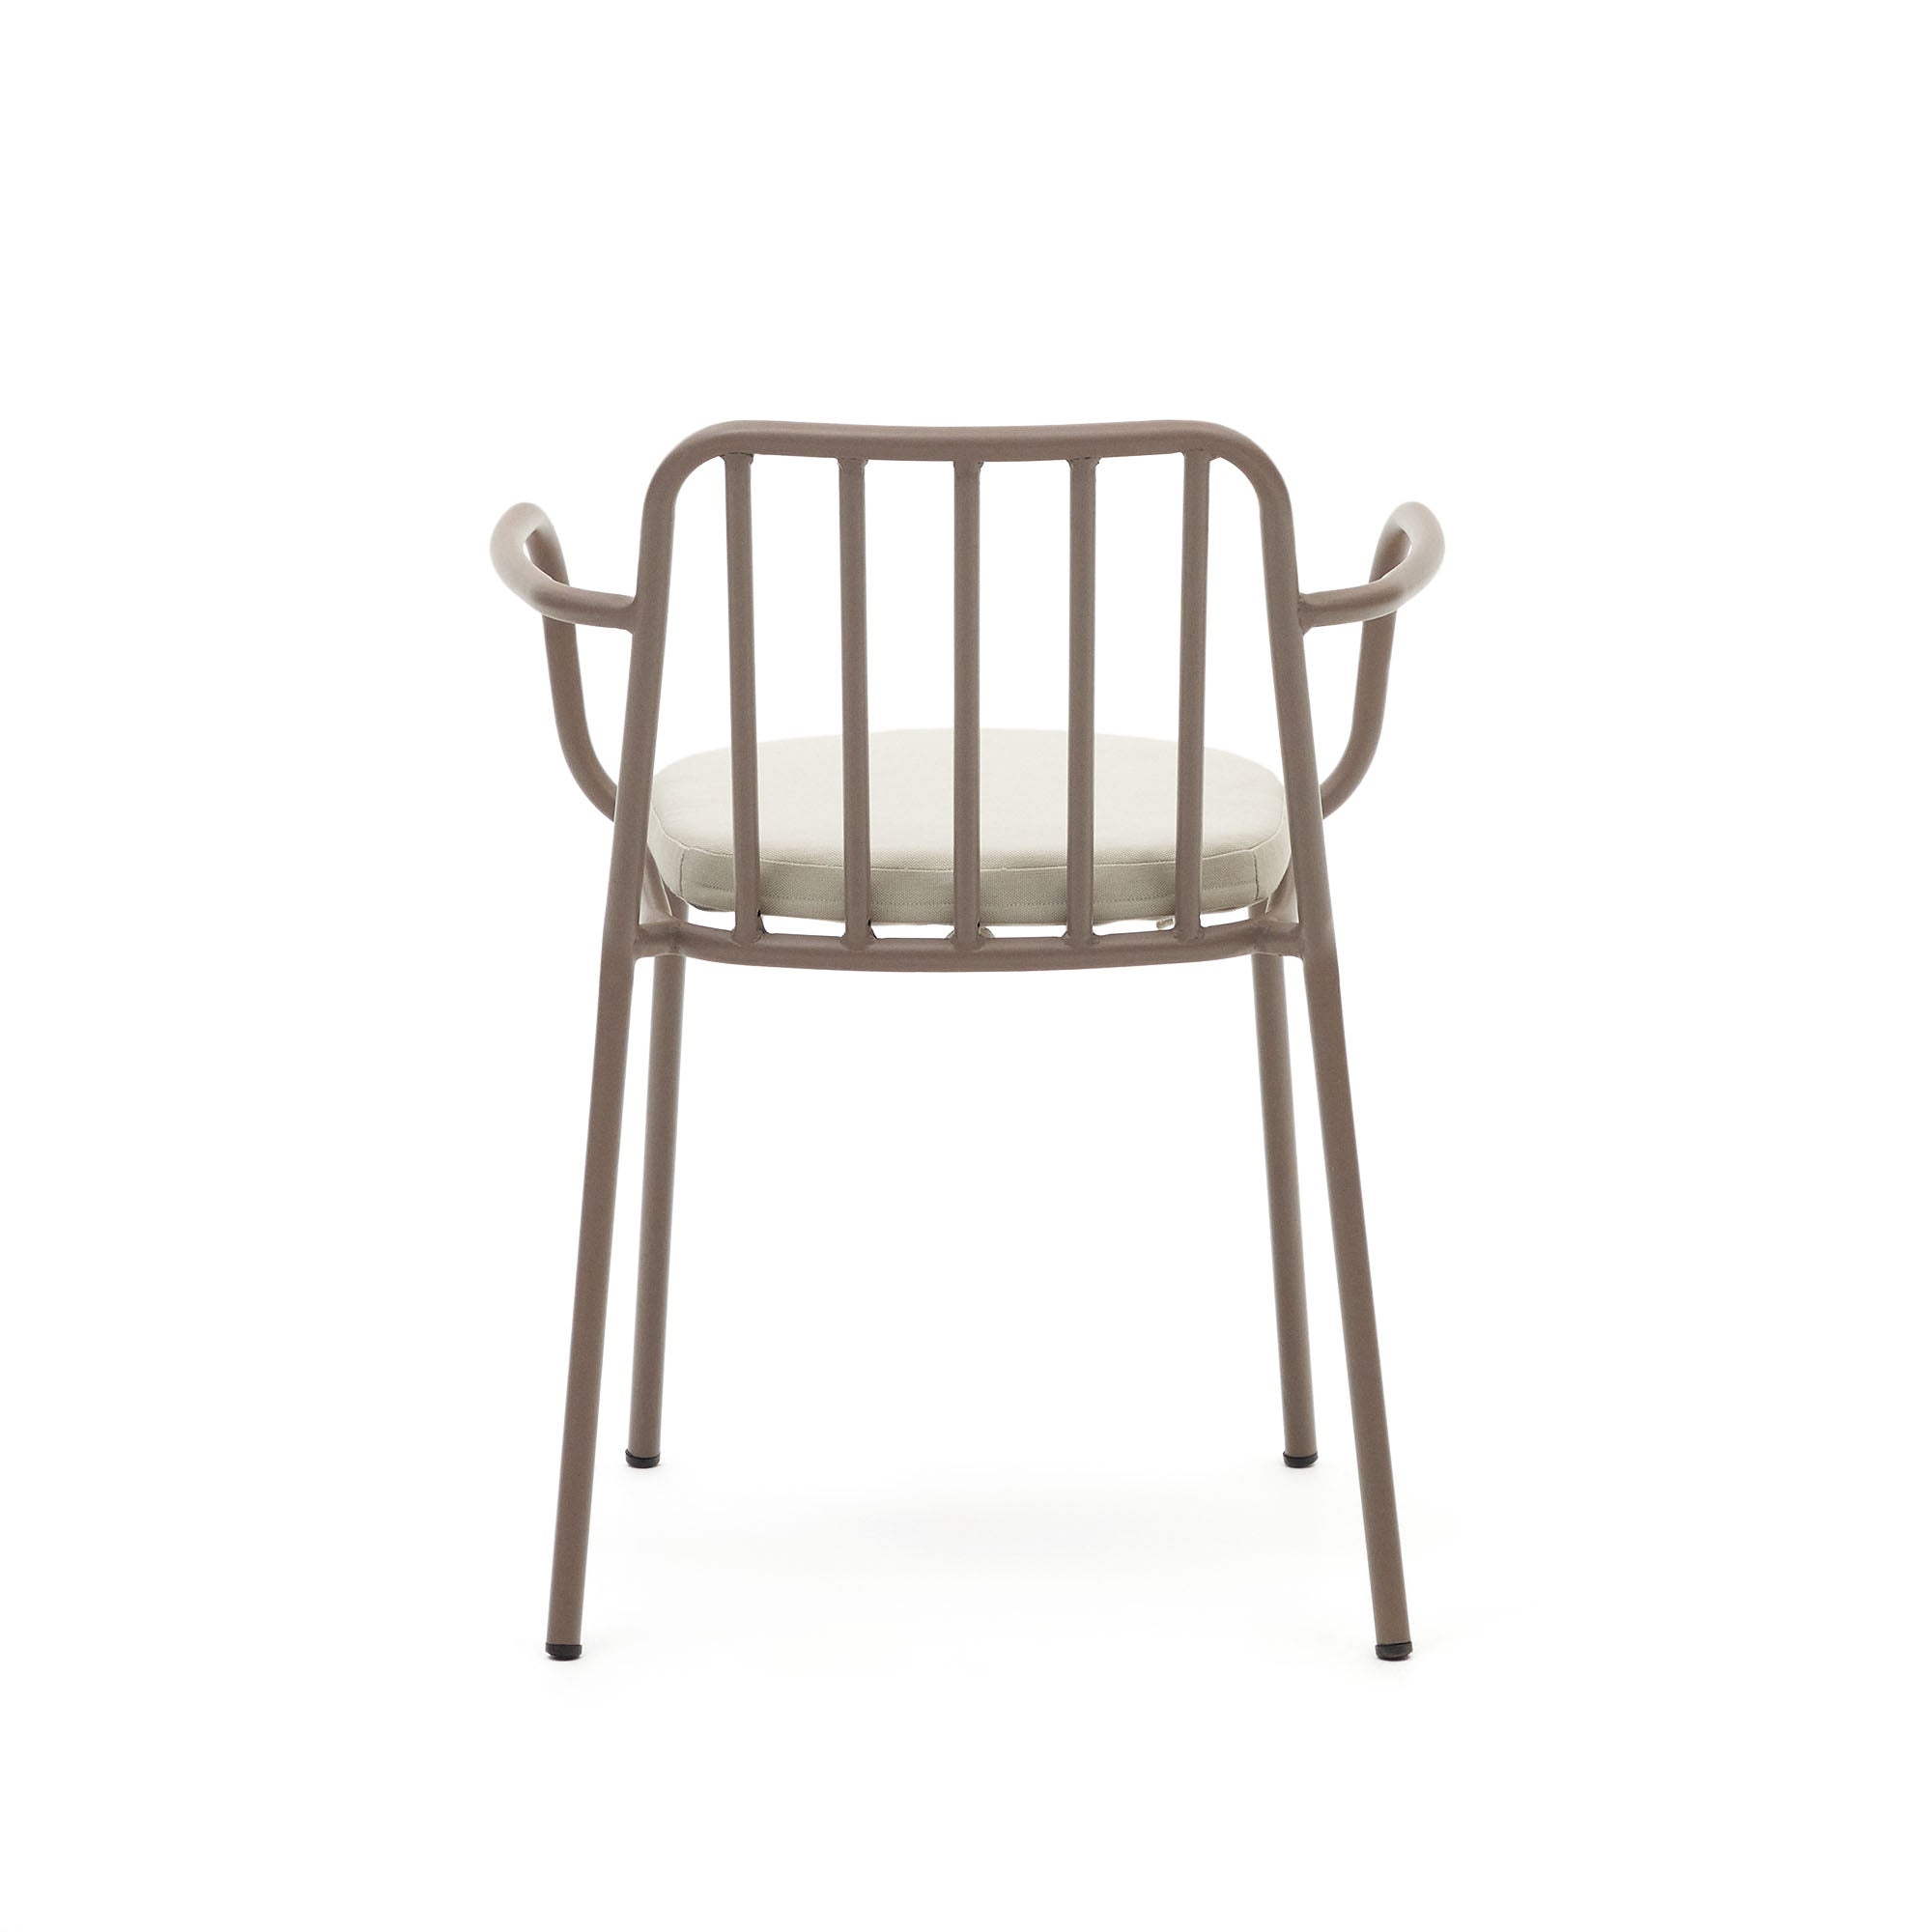 Bramant stackable steel chair with mauve finish